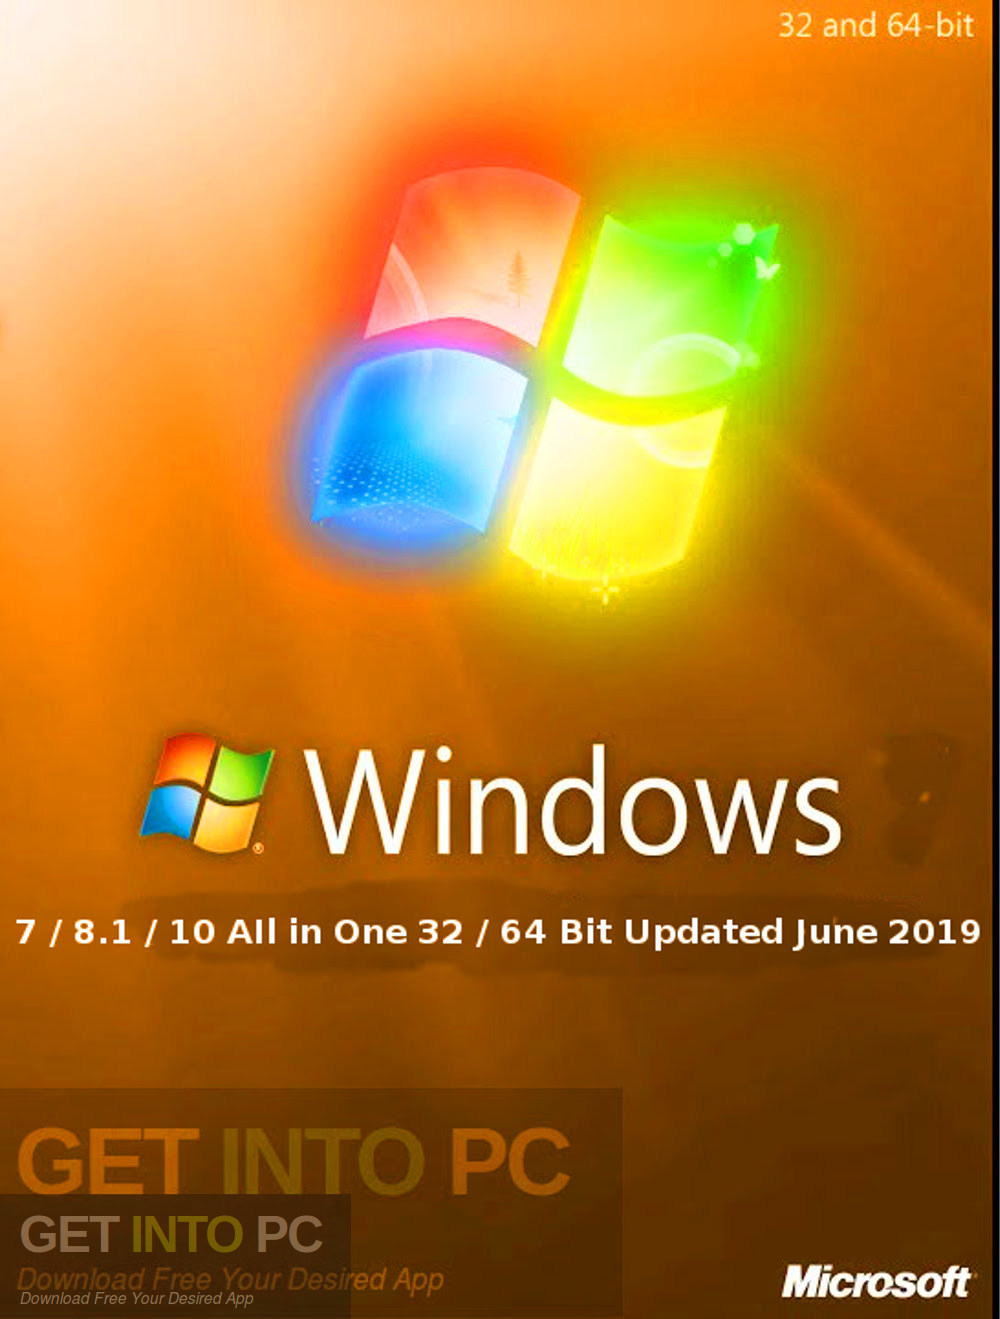 Windows 7 8.1 10 AIl in One 32 64 Bit Updated June 2019 Free Download GetintoPC.com